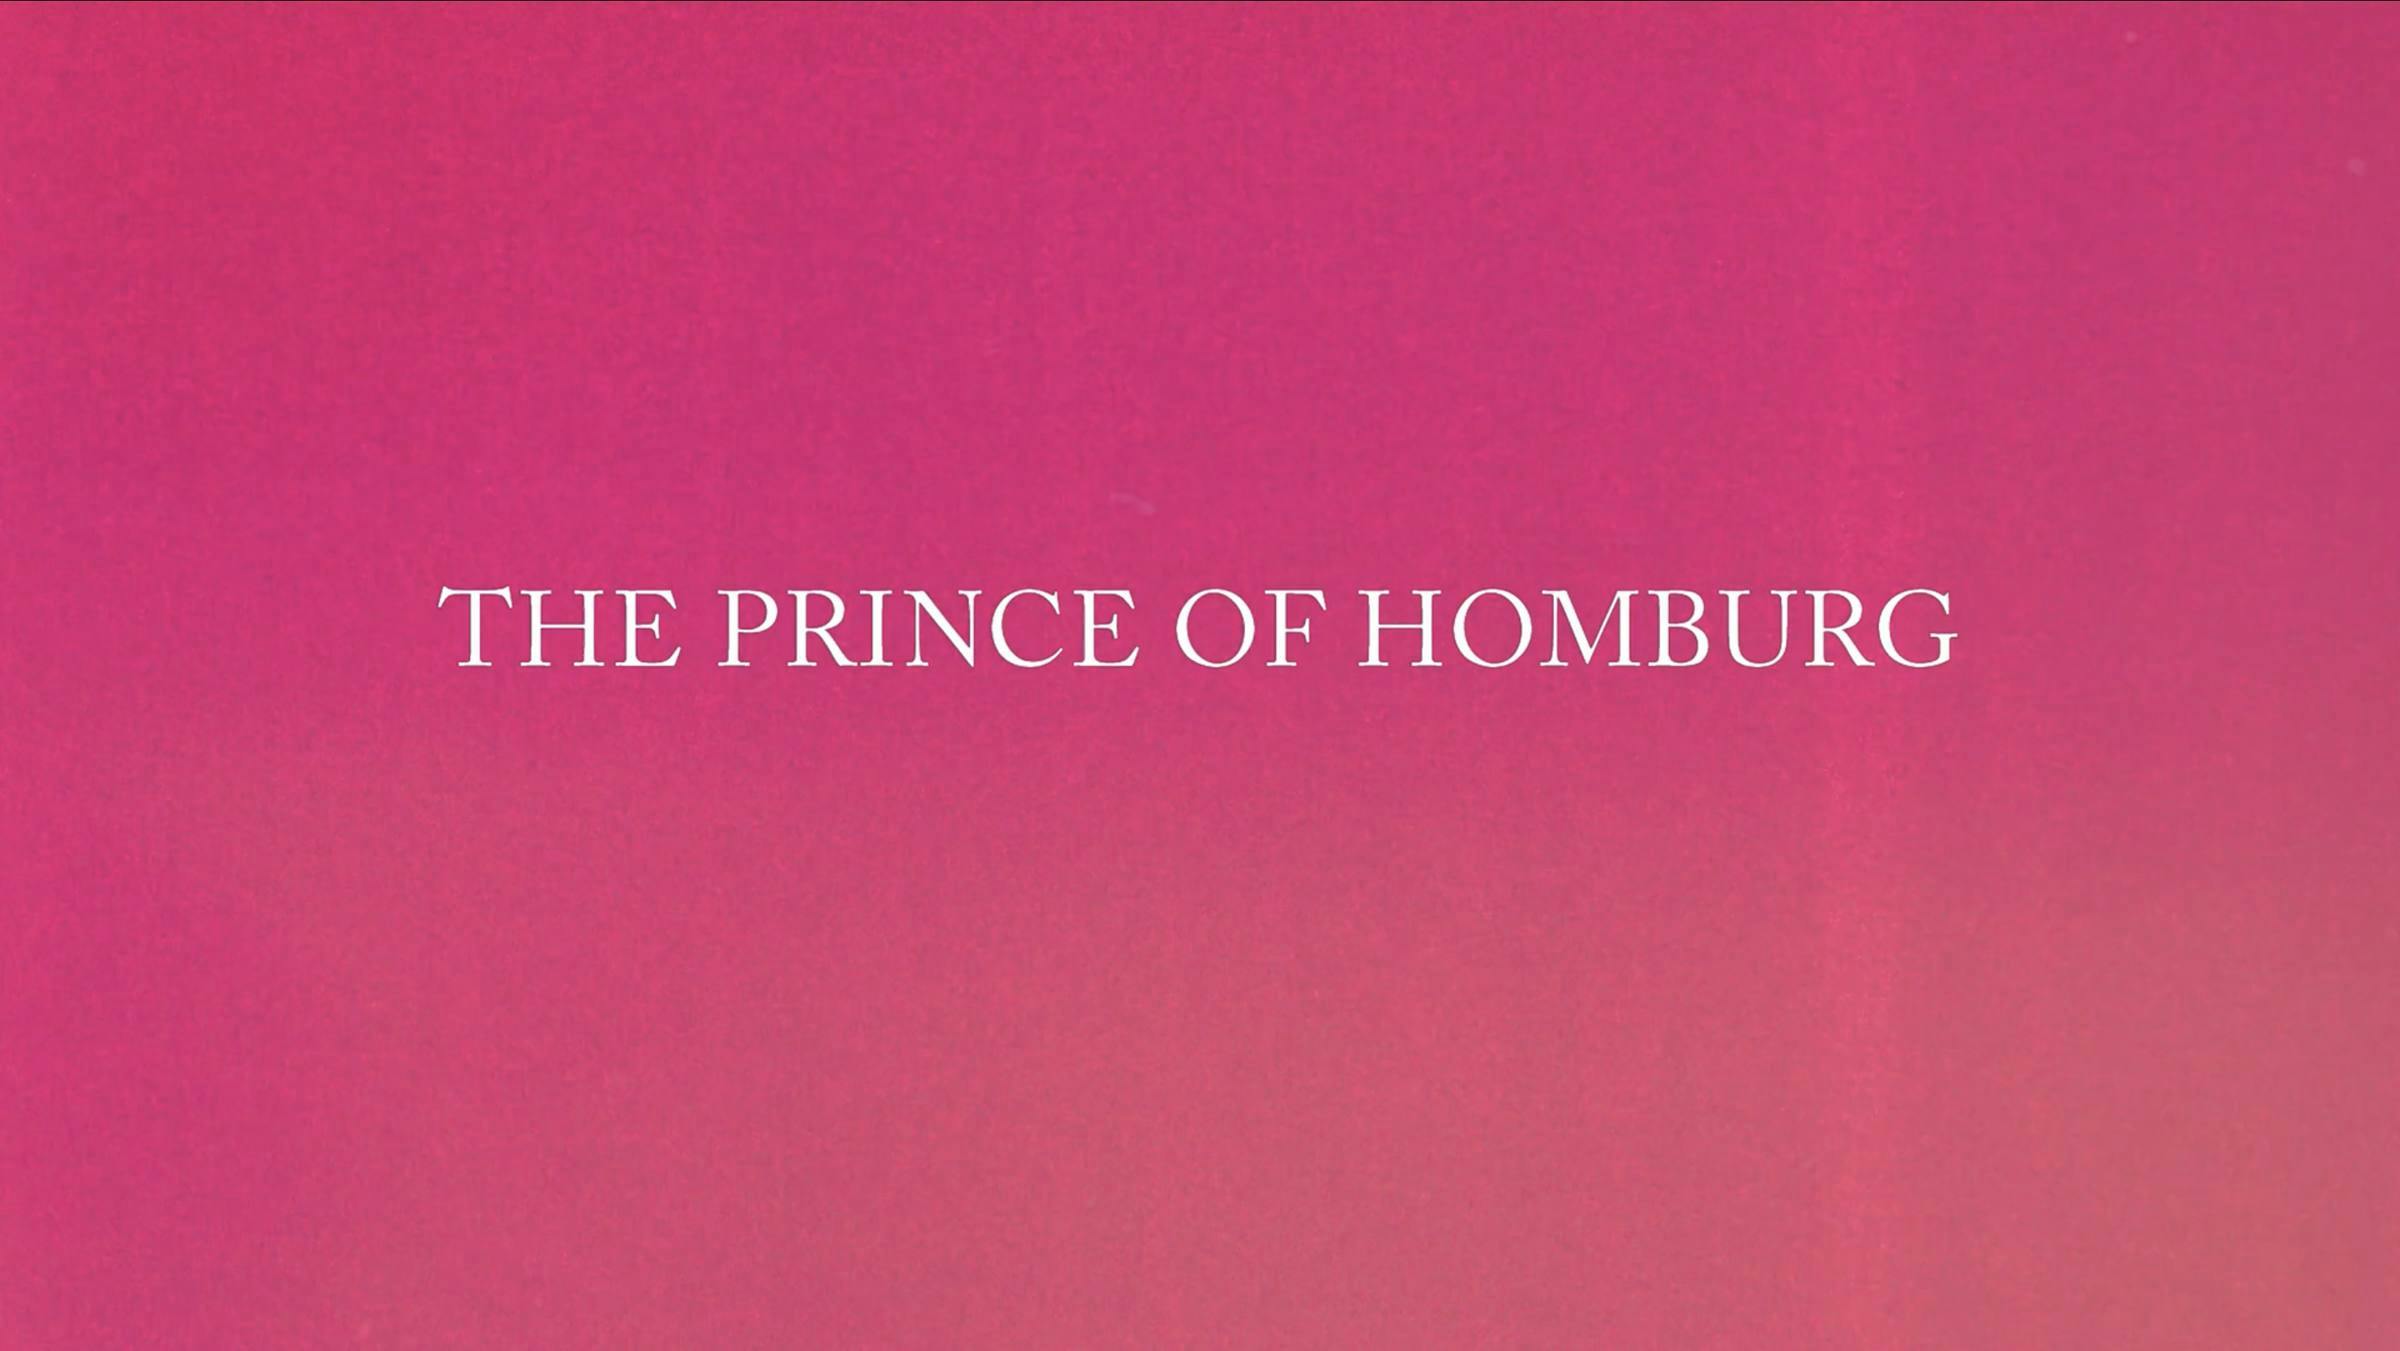 white text that says 'THE PRINCE OF HOMBURG' on a pink background